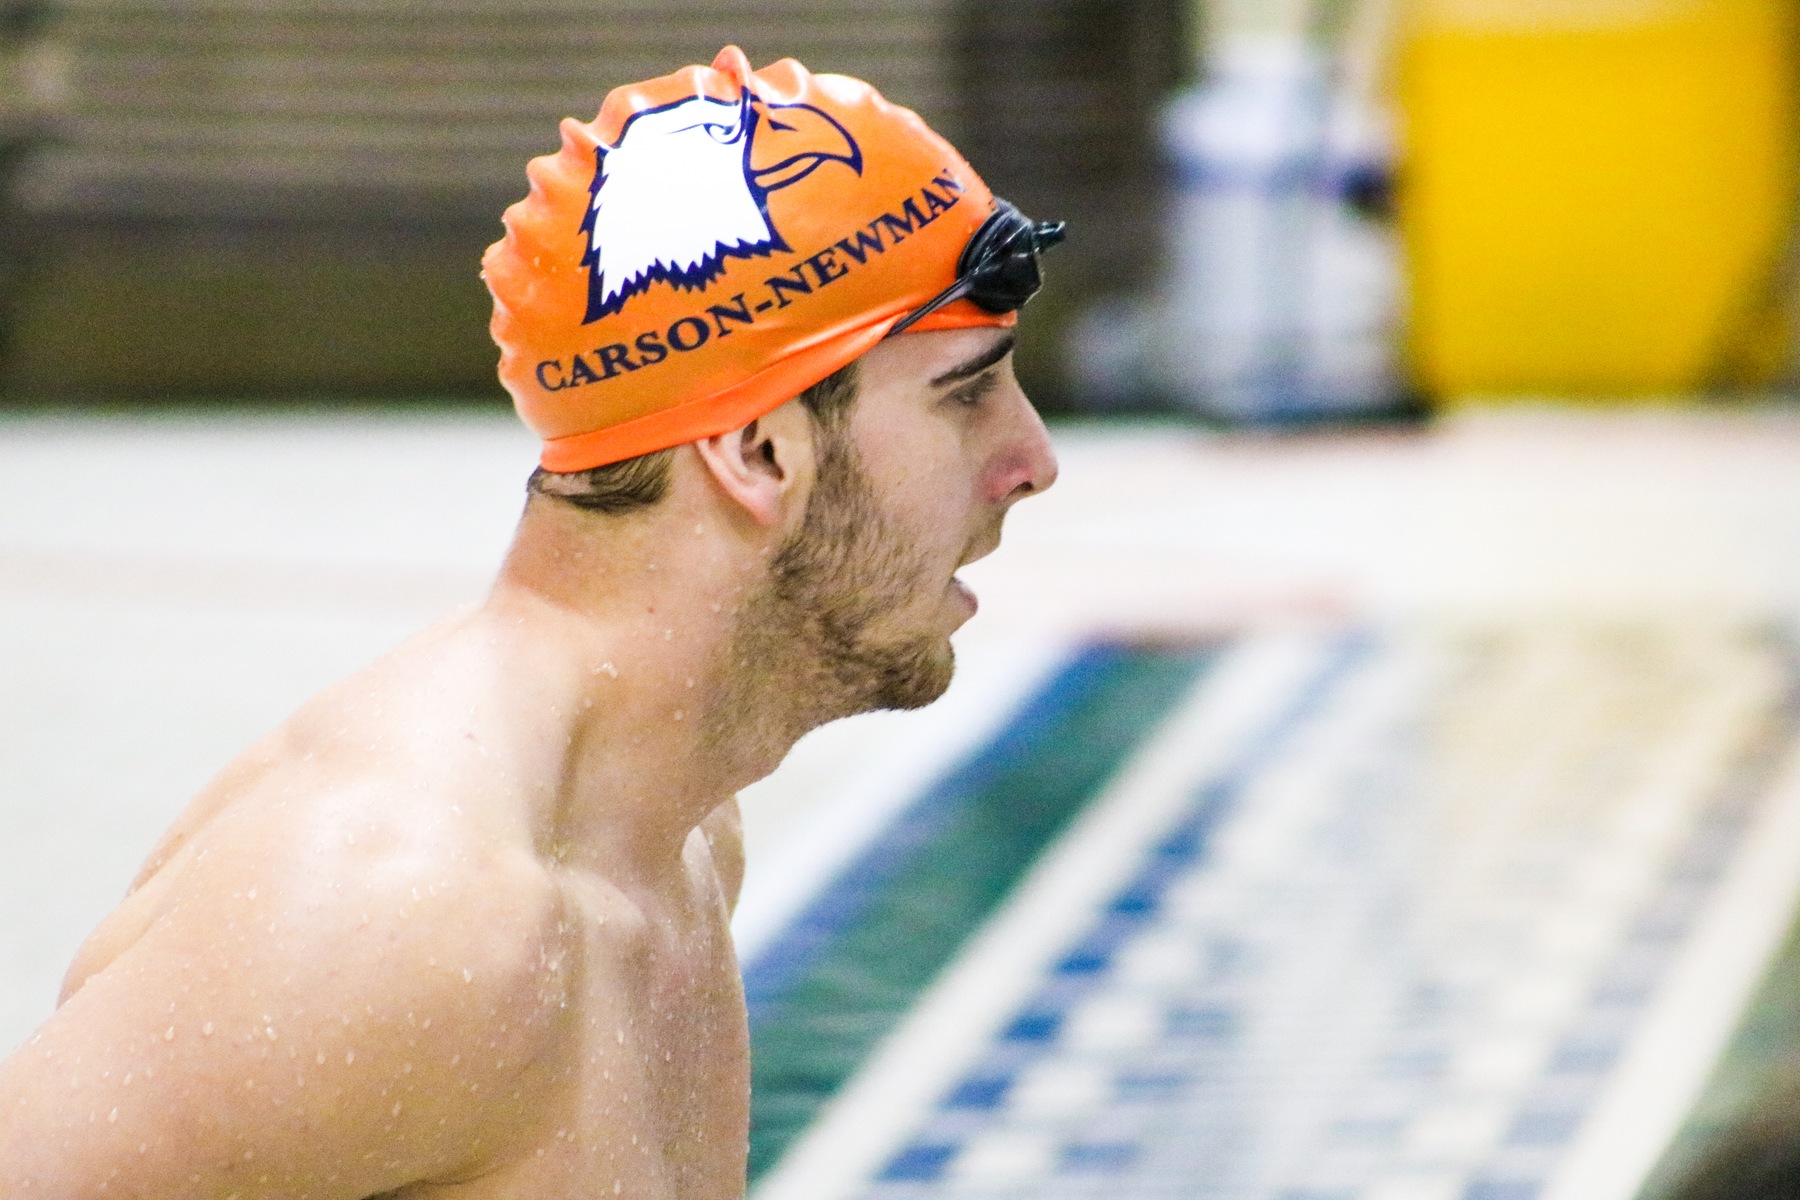 Eagles unfazed by competition, break slew of records on day one of UT Invitational